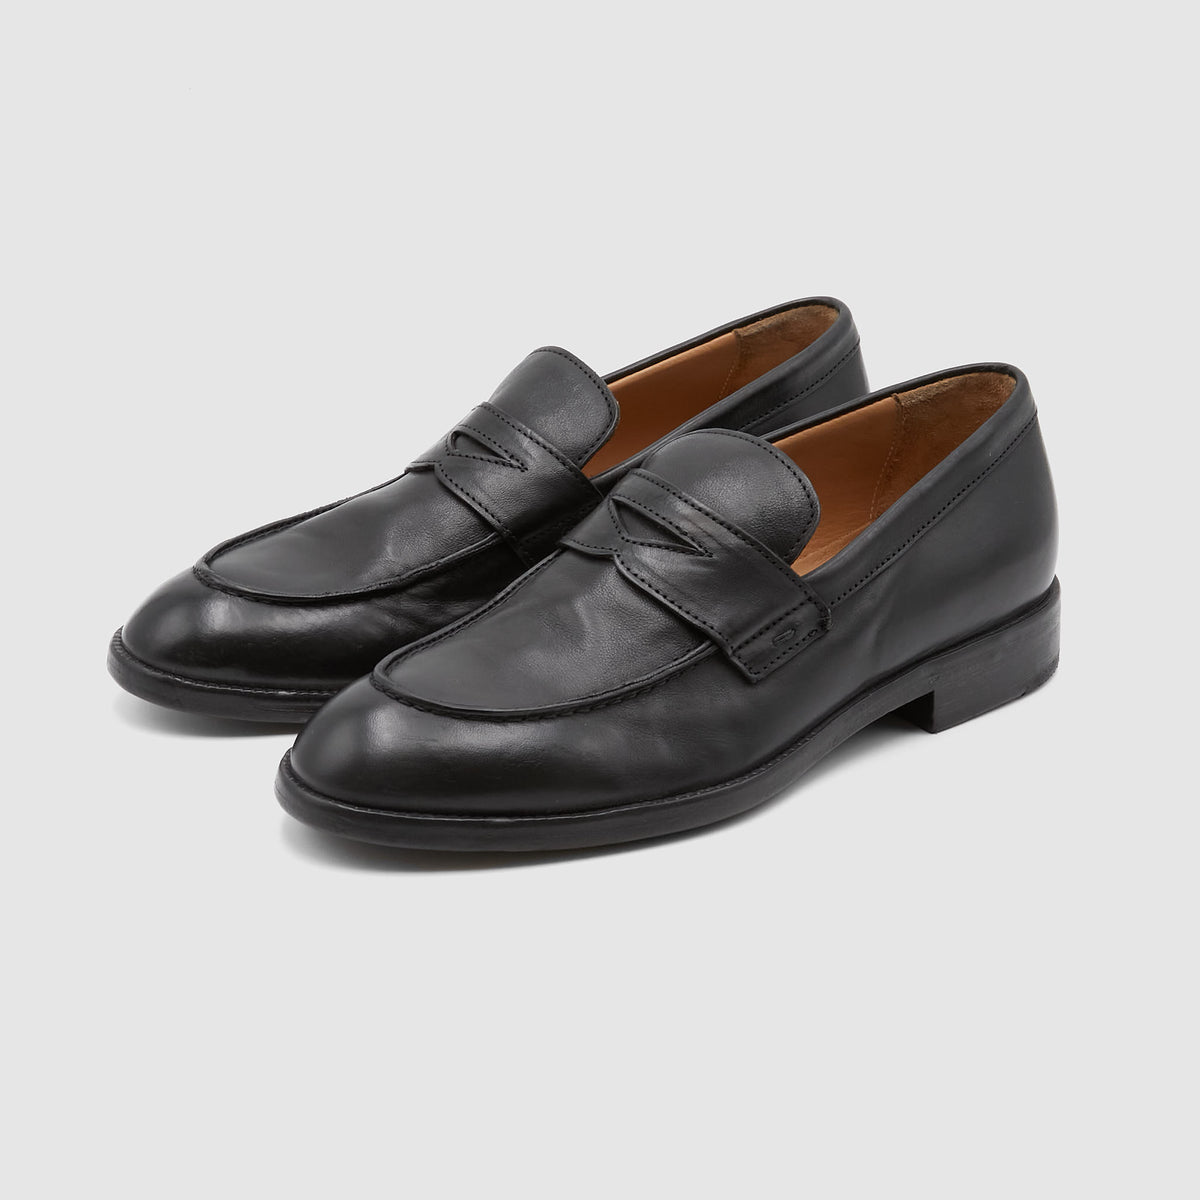 Moma Man Nappa Leather Penny Loafer